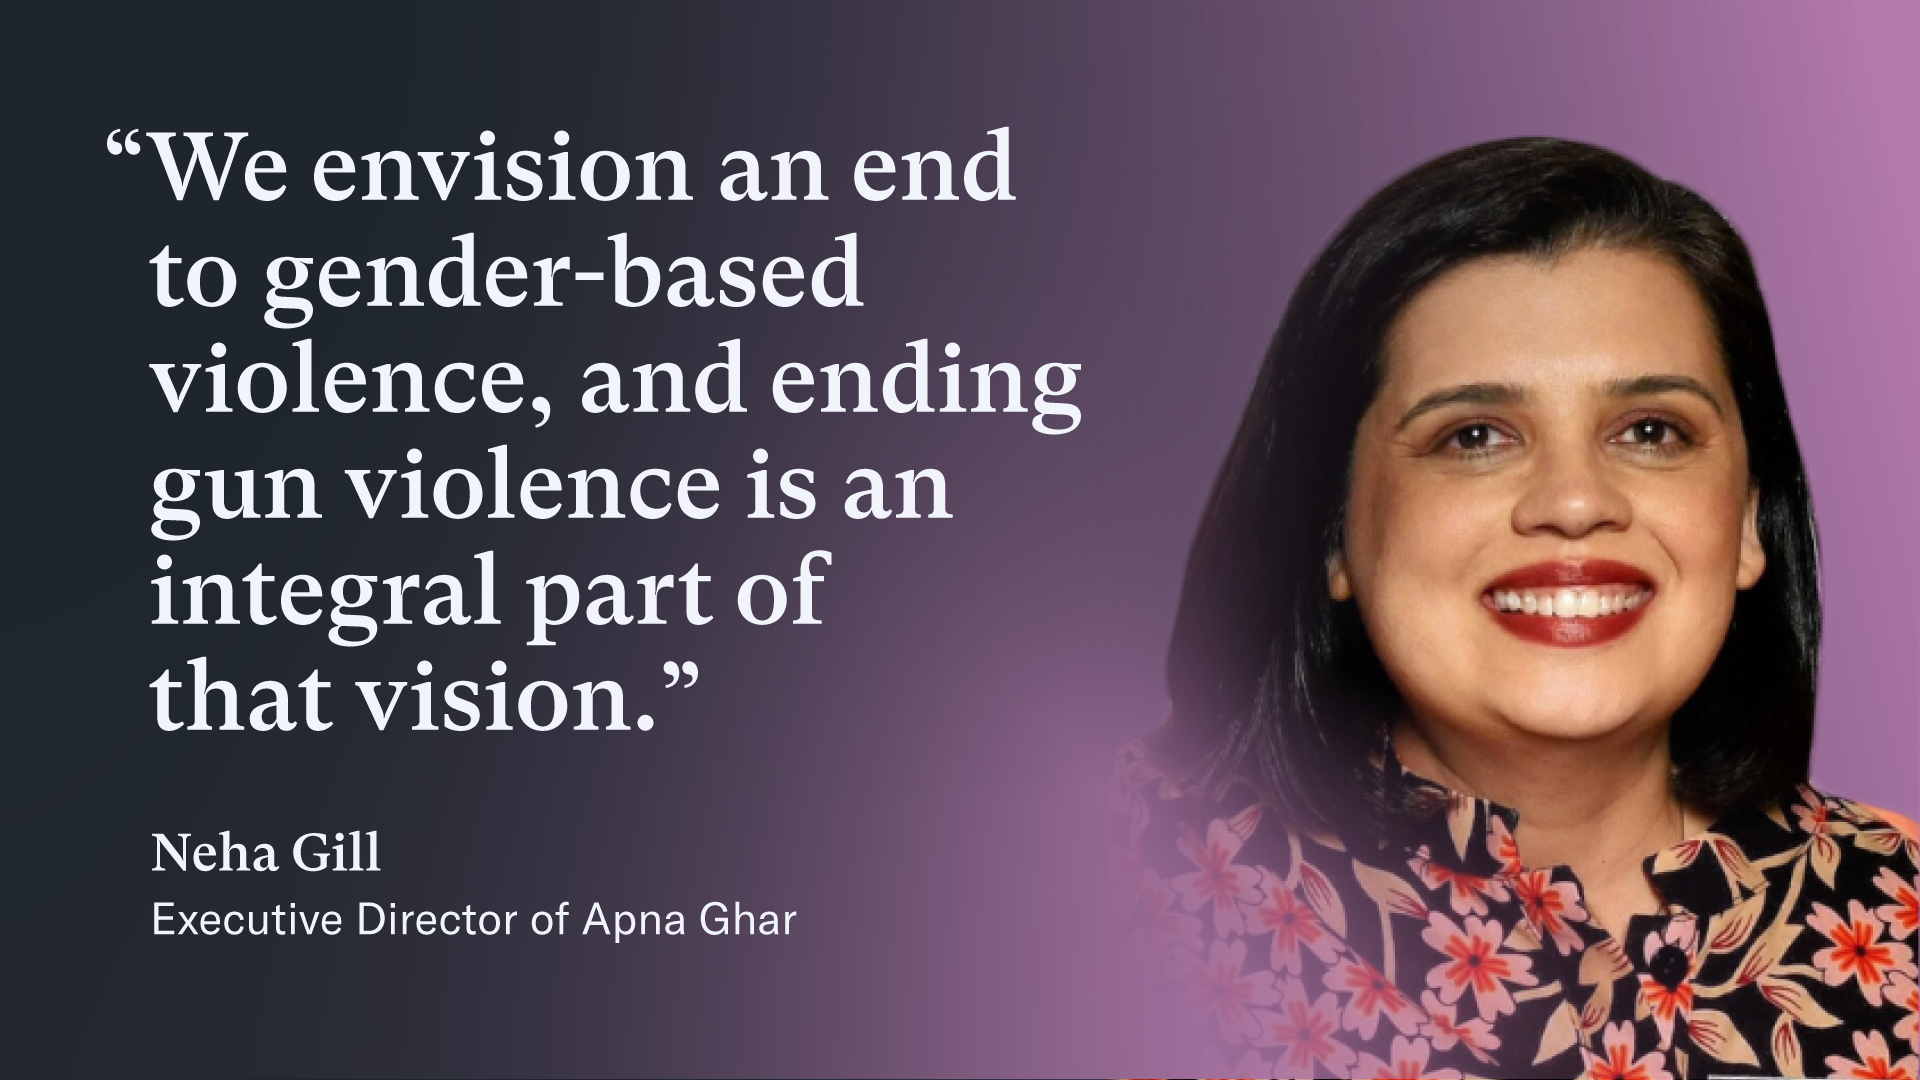 Quote graphic featuring an image of Neha Gill, the Executive Director of Apna Ghar. She is smiling woman with dark, shoulder-length hair, red lipstick, and a black blouse with pink flowers with red centers and tan stems.